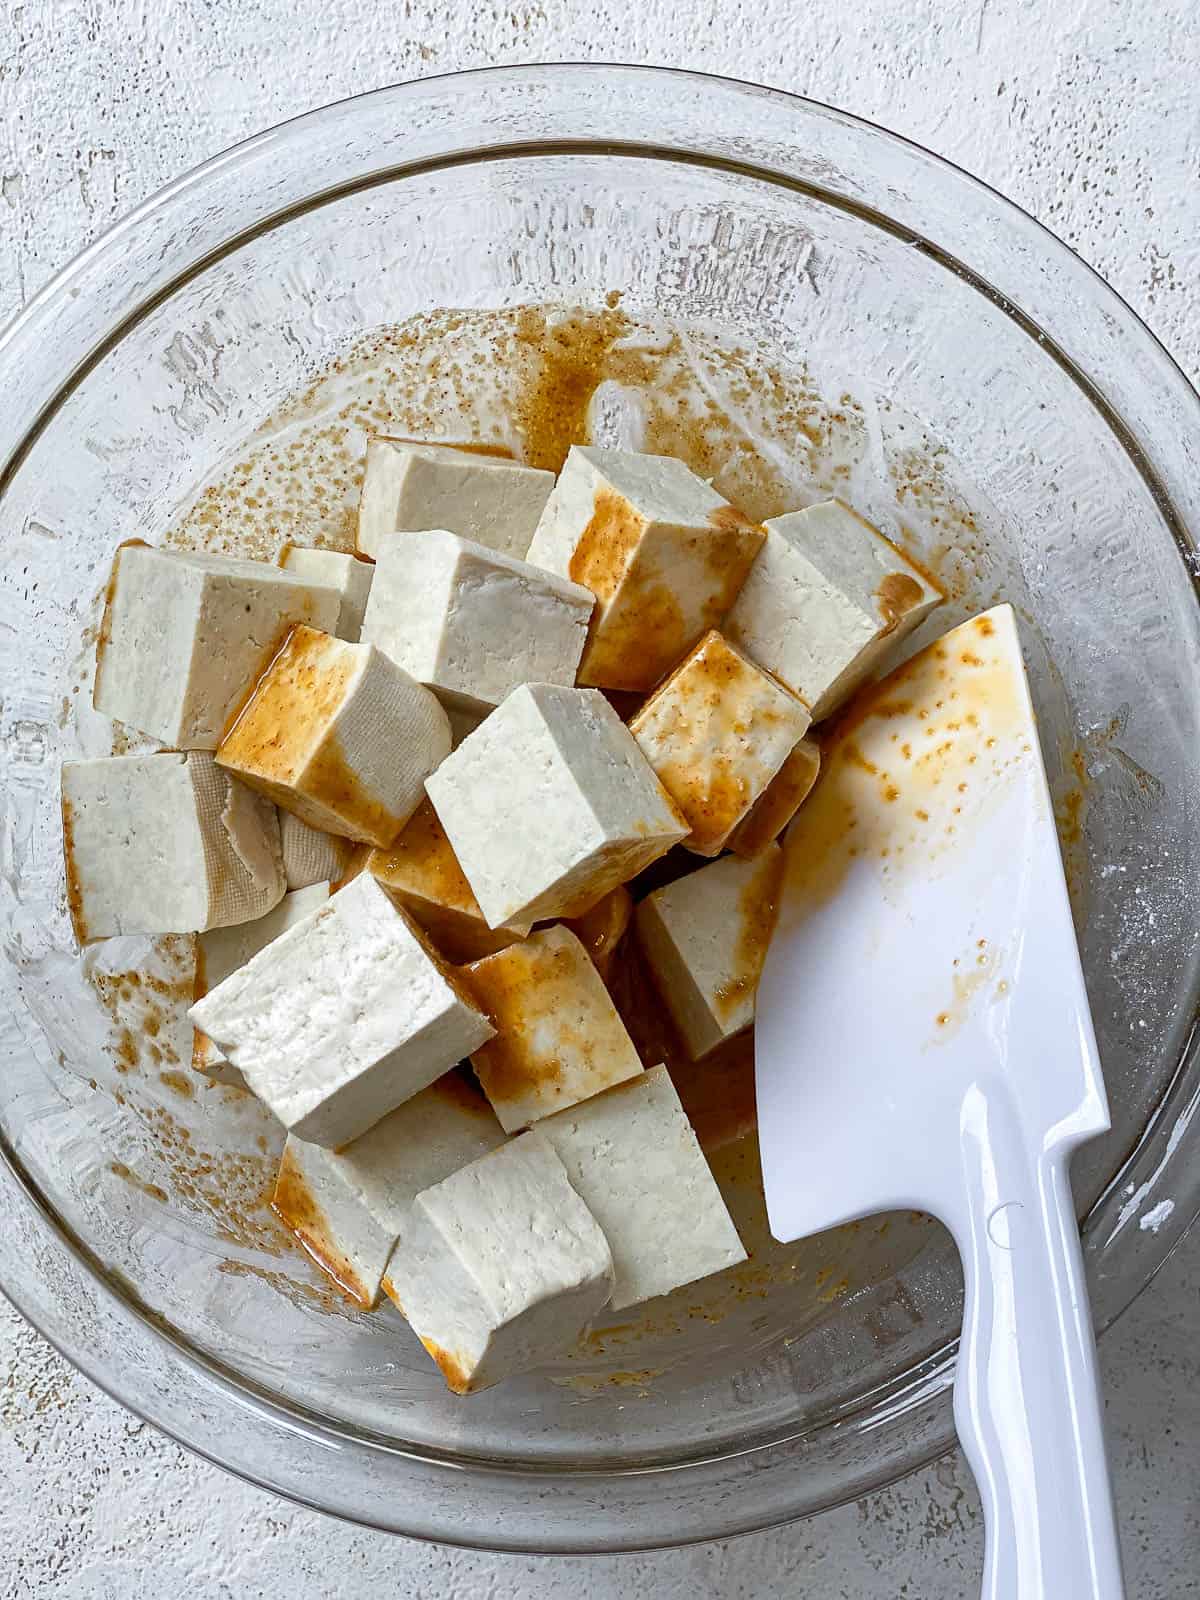 Tofu cubes in a bowl being tossed to coat well.